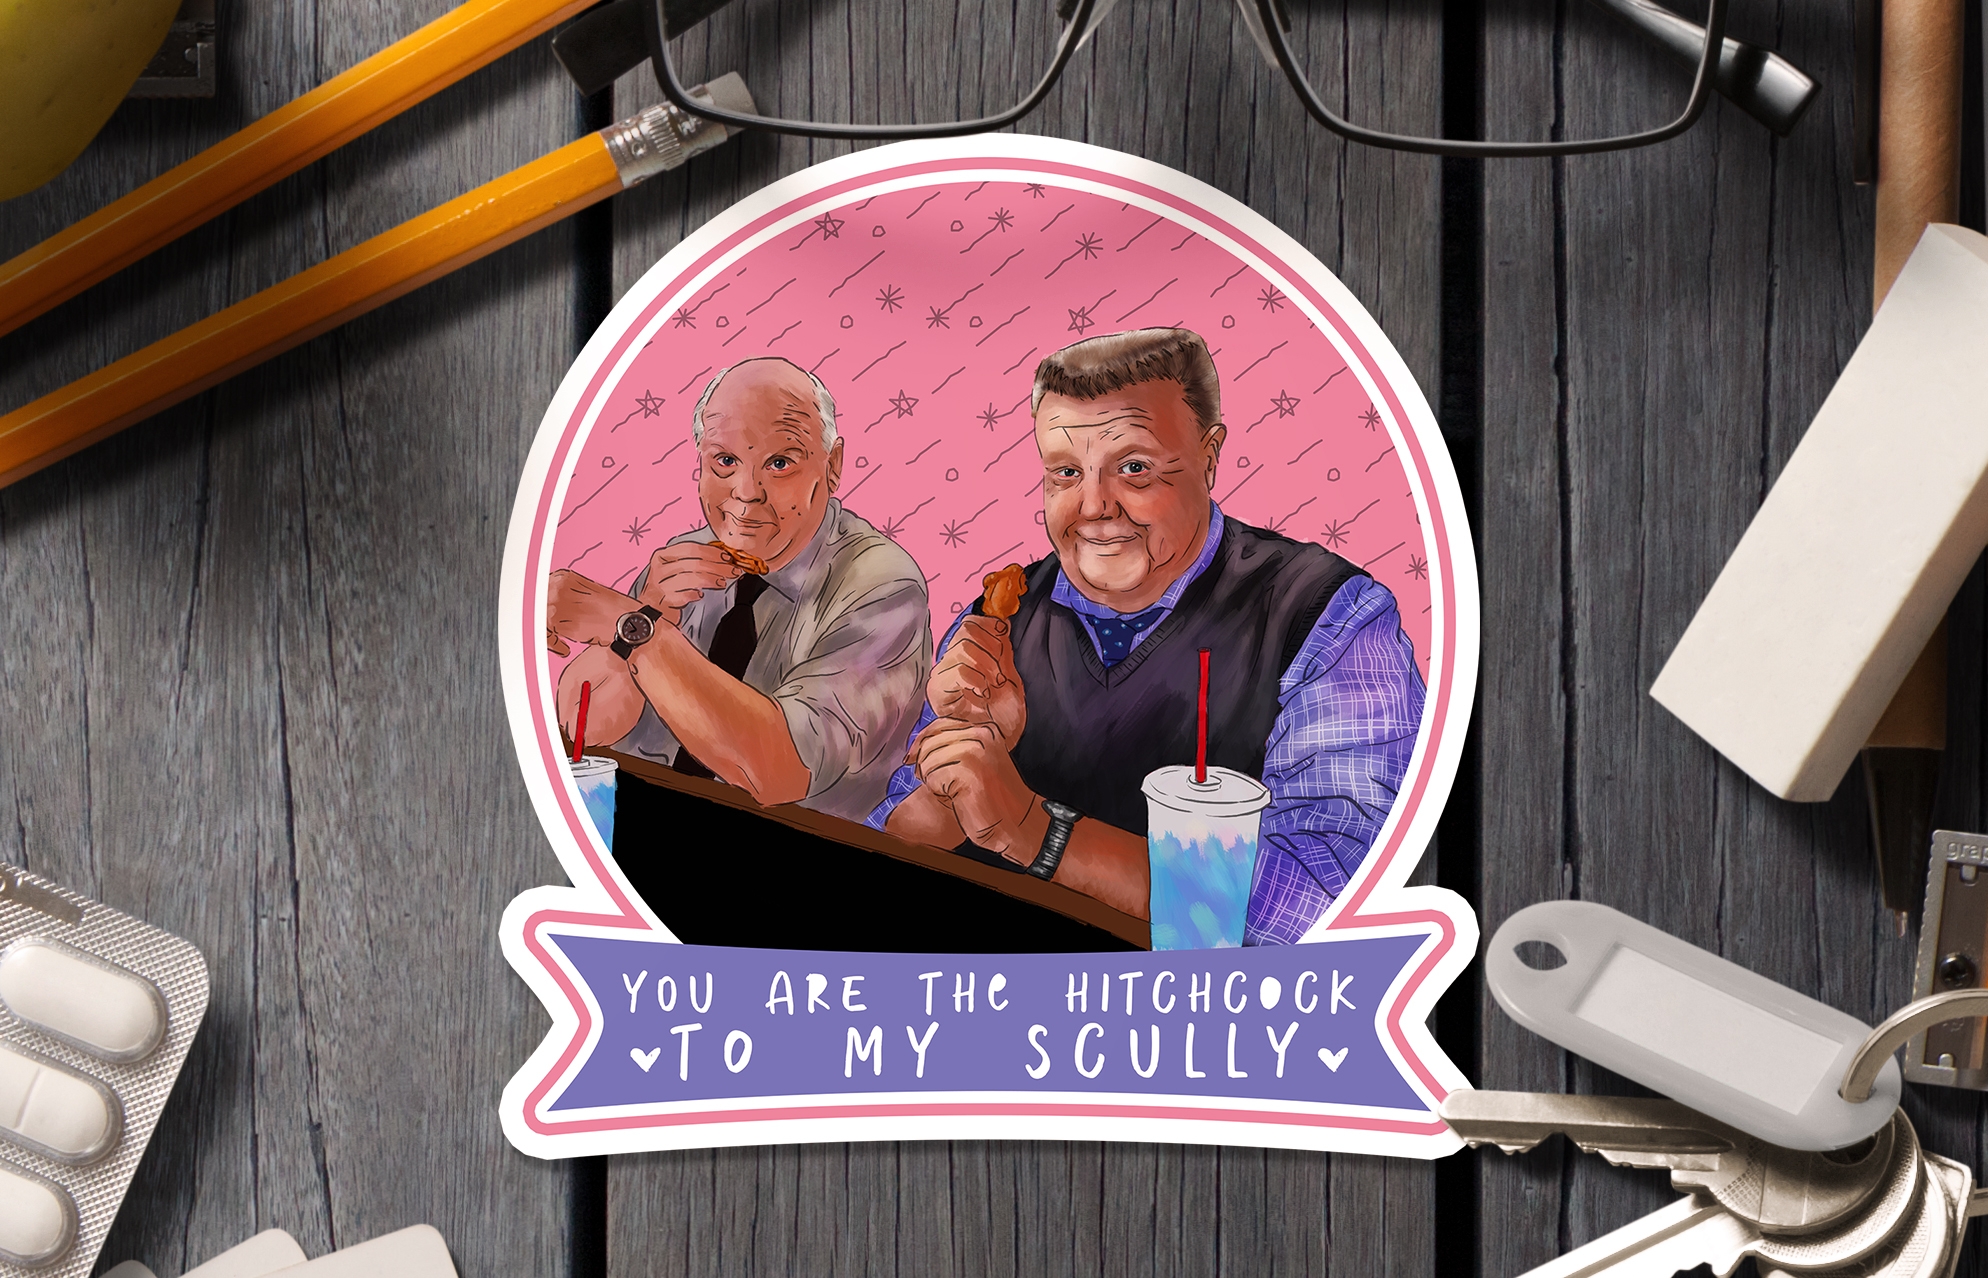 Illustrating the cast of Brooklyn Nine Nine – Hitchcock and Scully